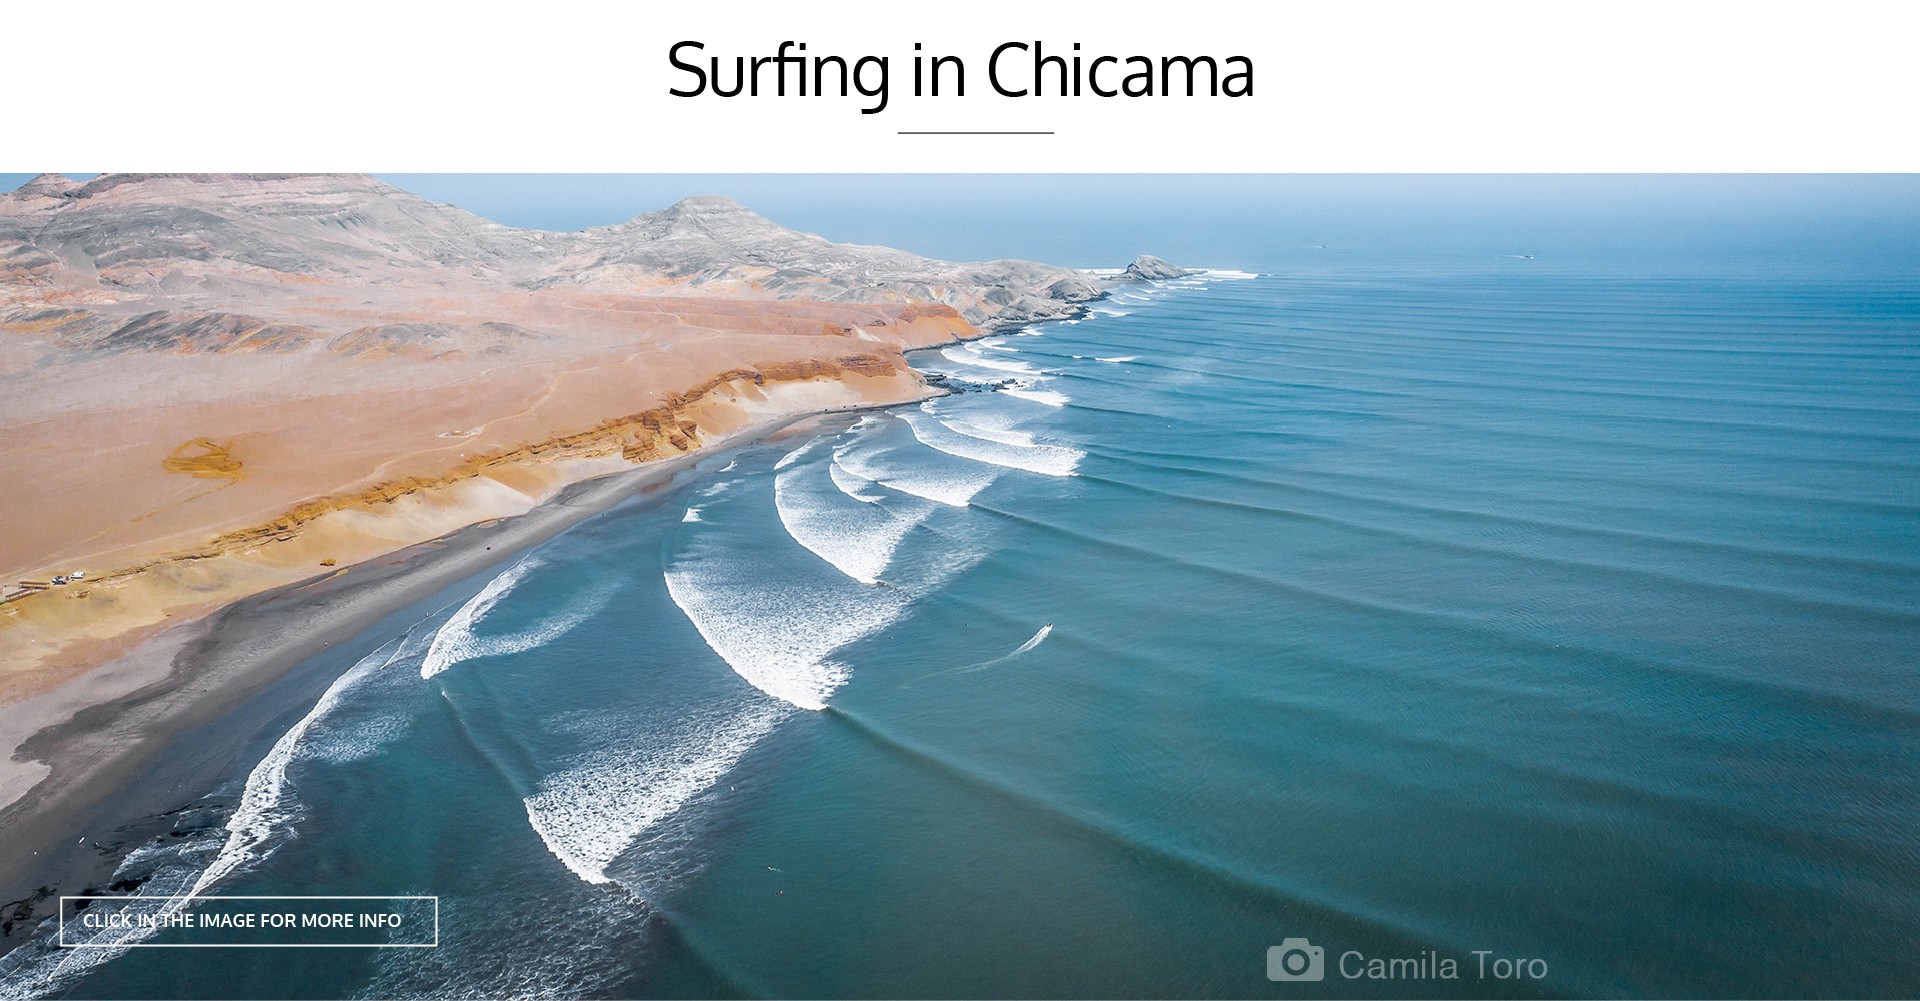 SURFING IN CHICAMA